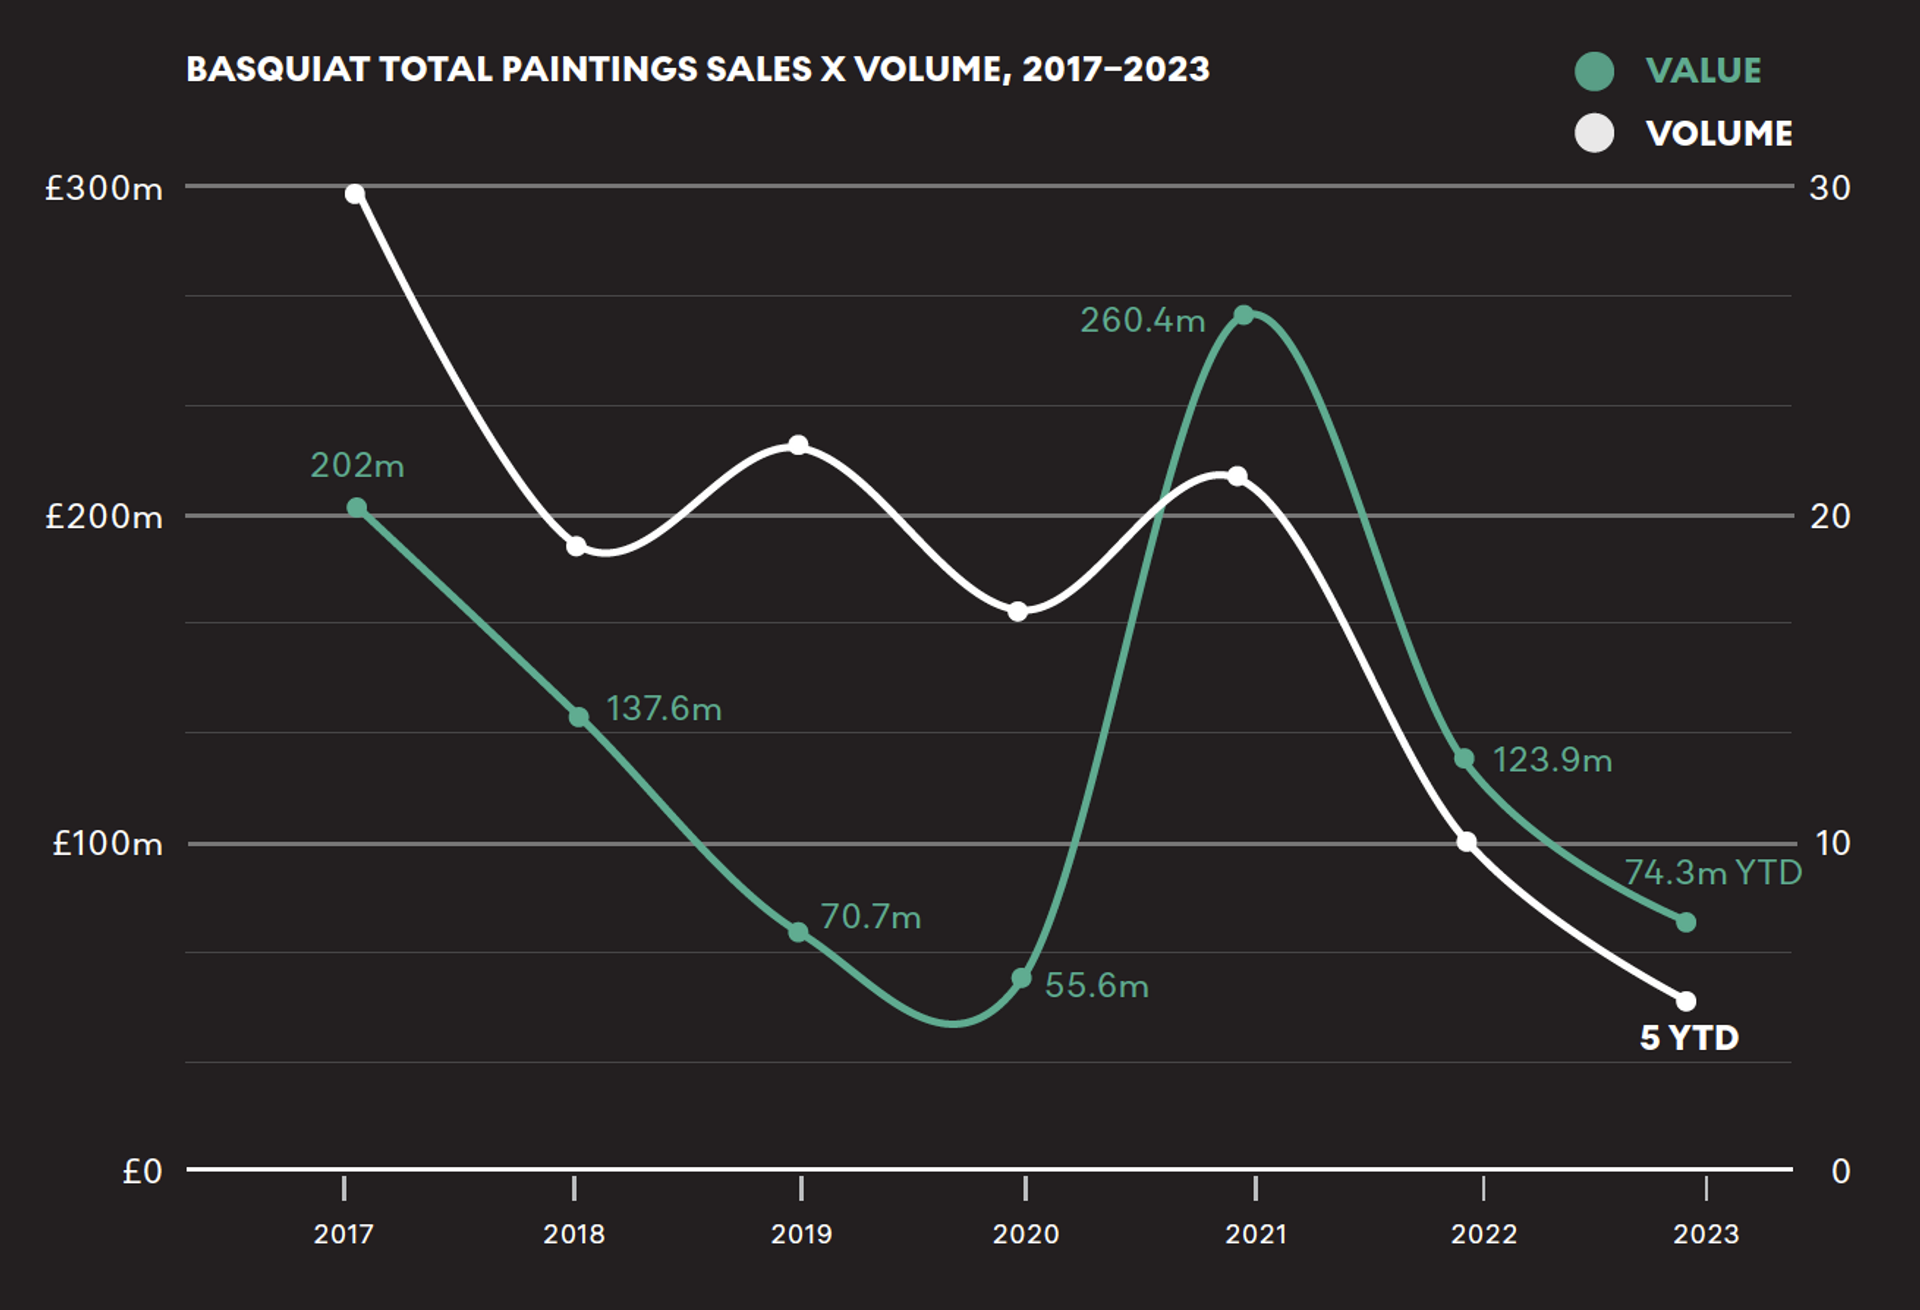 A double line graph representing Jean-Michel Basquiat's sales of paintings and the volume of sales over a five-year period from 2017 to 2023.